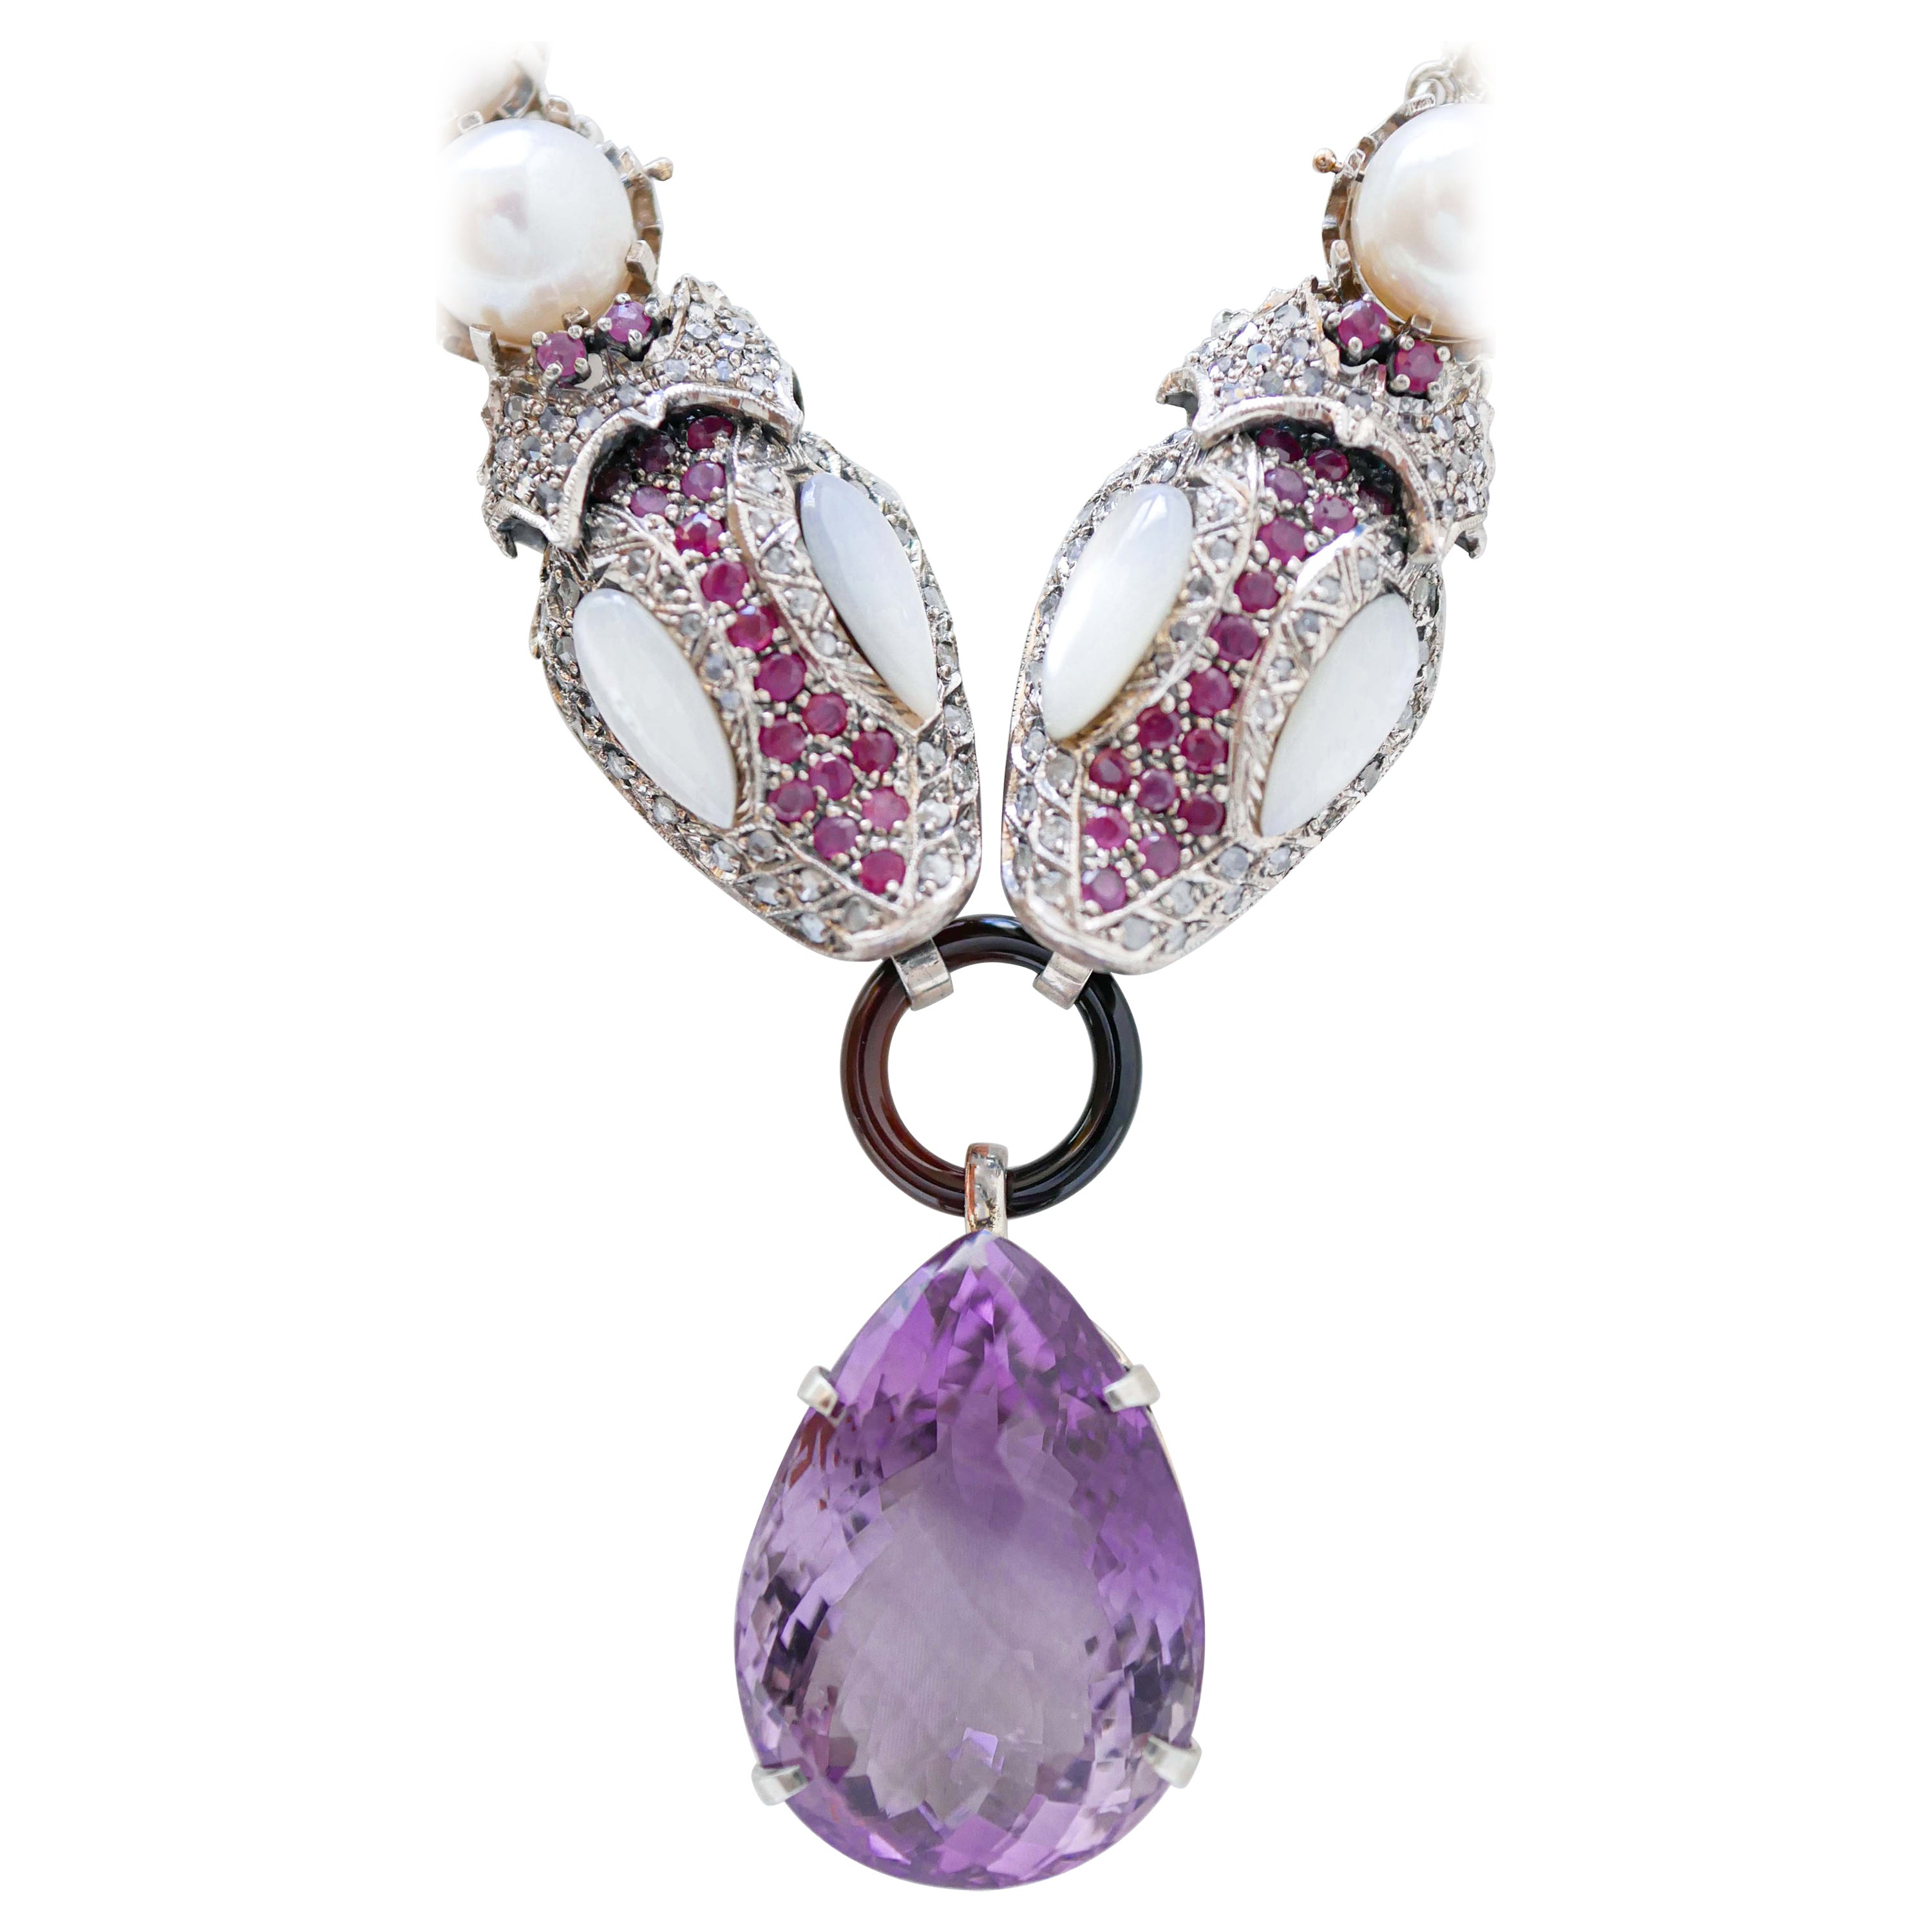 Amethyst, Rubies, Pearls, White Stones, Diamonds, Rose Gold and Silver Necklace.